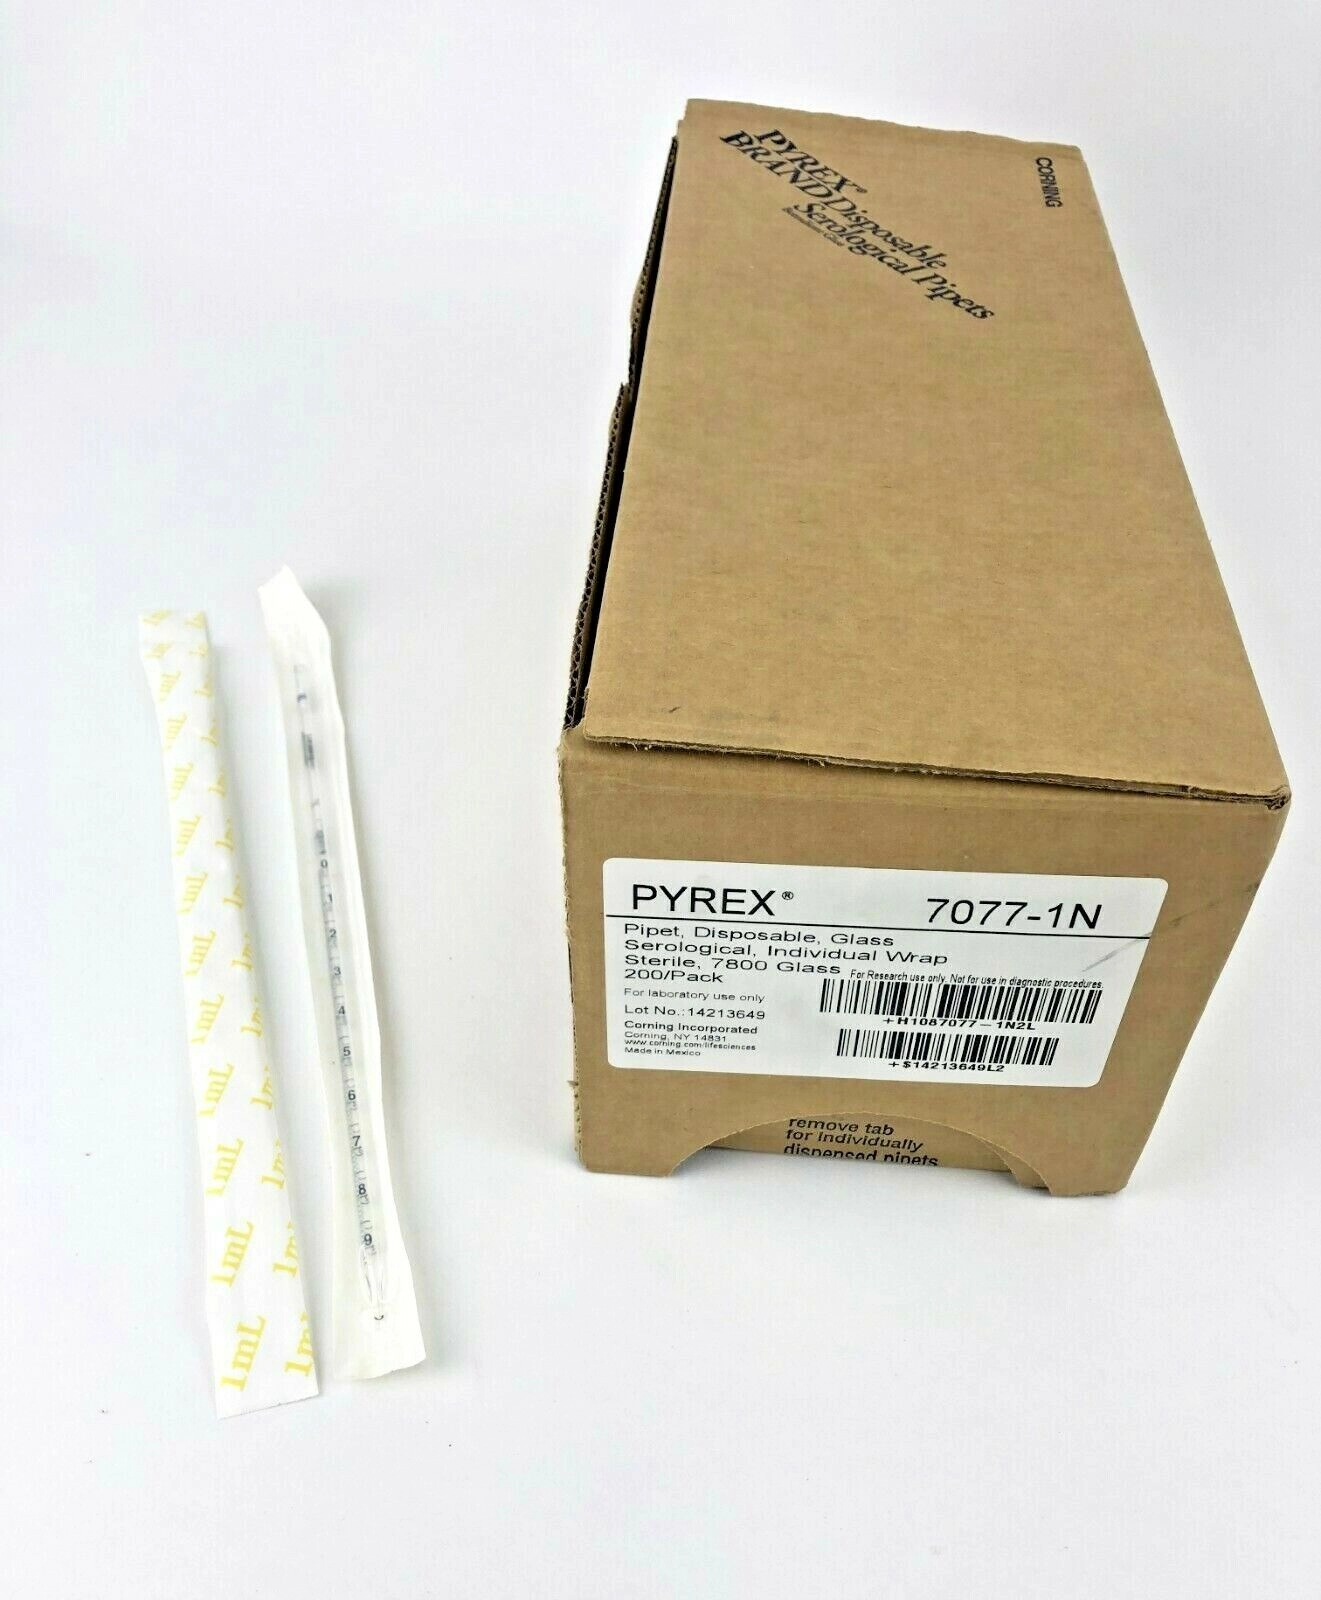 1ml Disposable Glass Serological Pipette, Pyrex 70